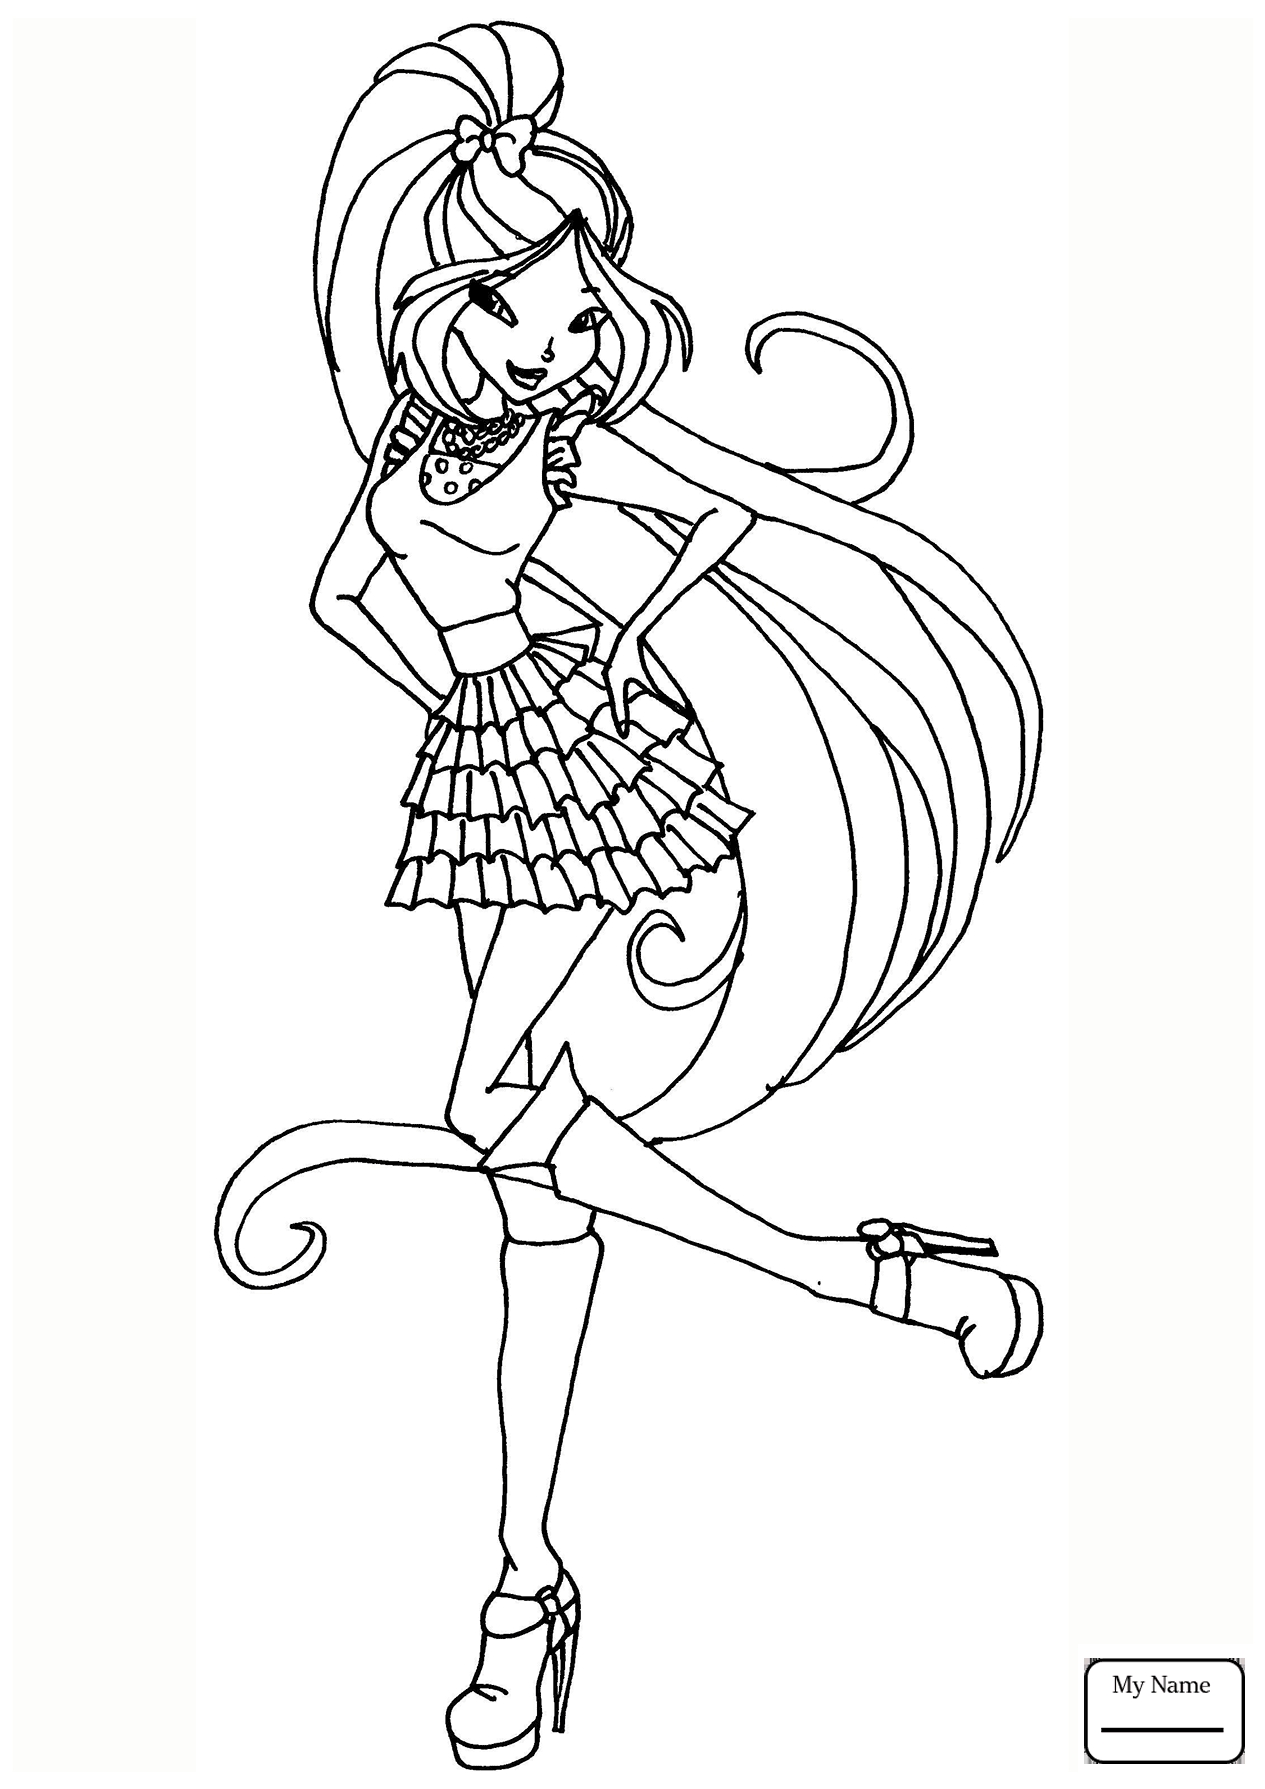 Winx Club Coloring Pages - Musa winx coloring pages download and print